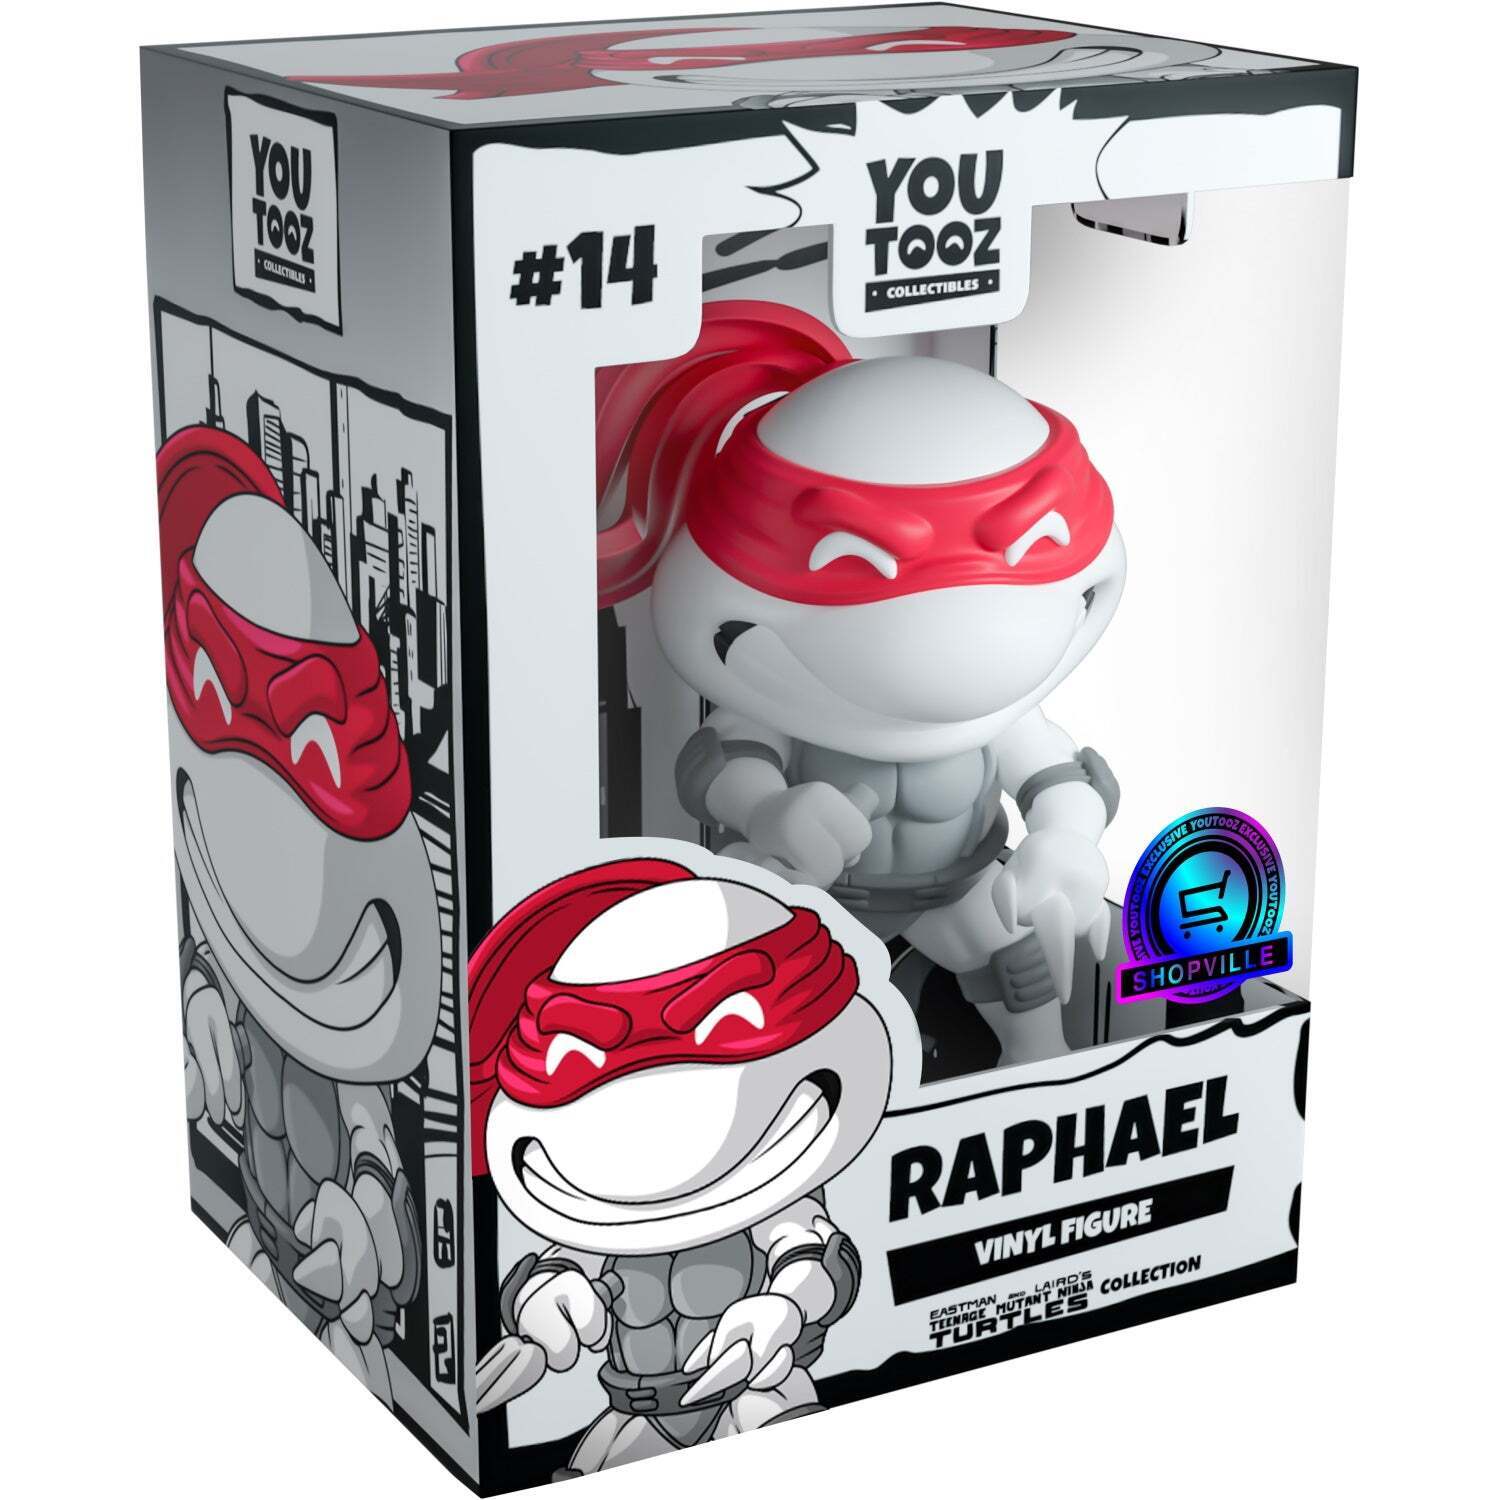 Youtooz x Shopville - Eastman & Laird's TMNT Collection - Raphael [Black&White]